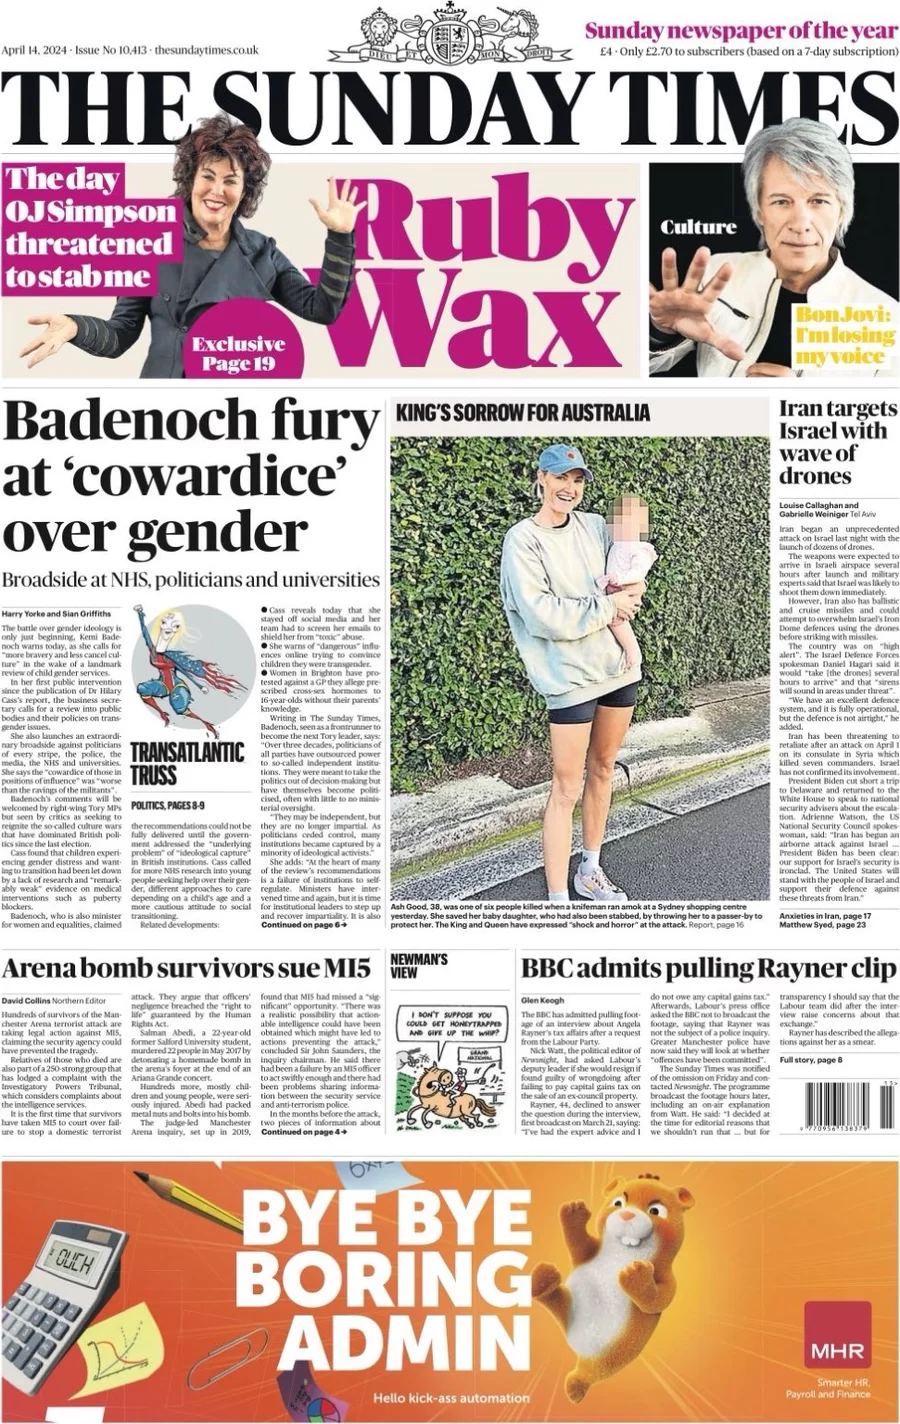 The Sunday Times - Badenoch fury at cowardice over gender 